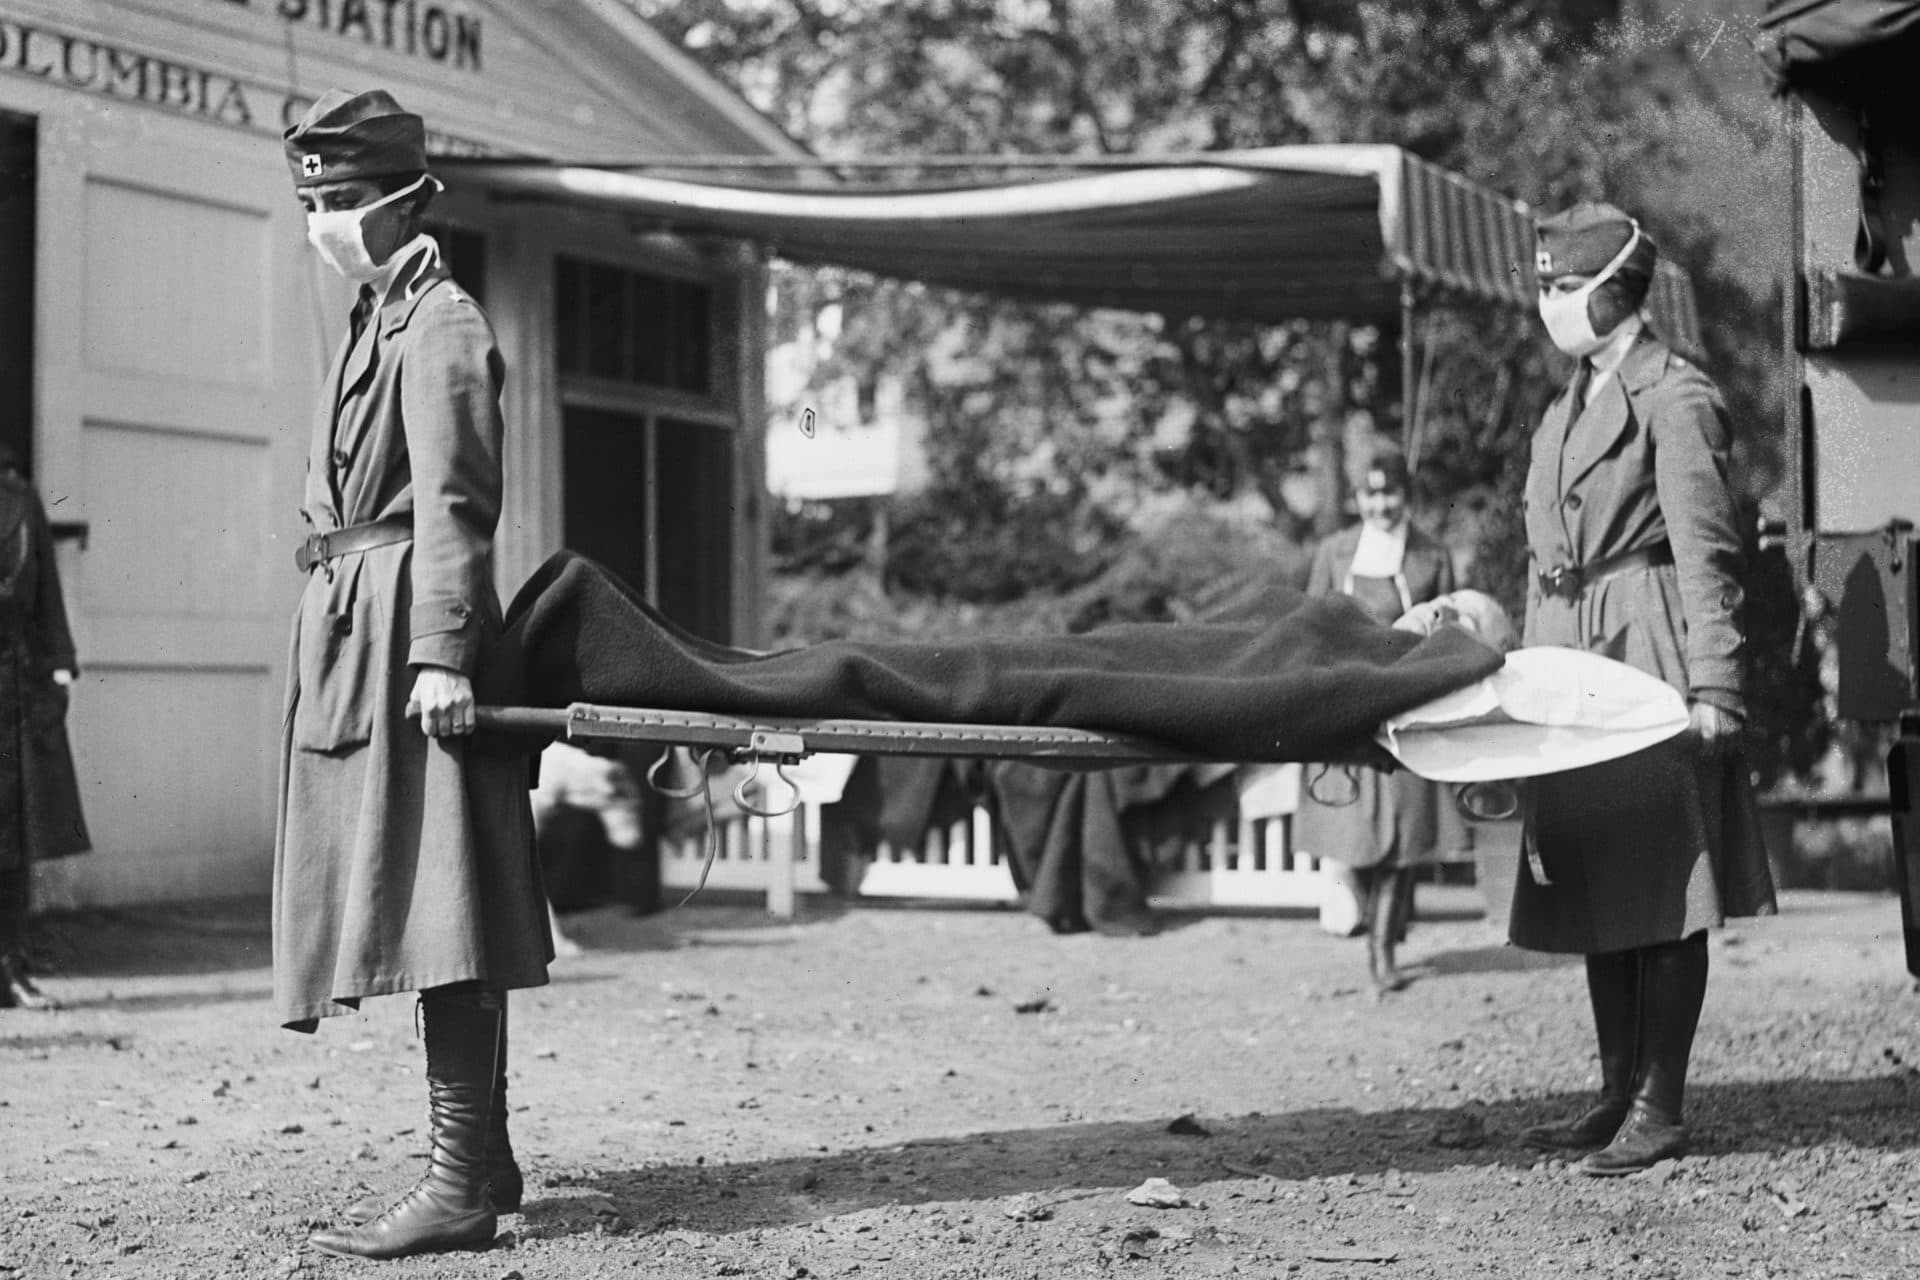 A demonstration at the Red Cross Emergency Ambulance Station in Washington during the influenza pandemic of 1918. (Library of Congress via AP)